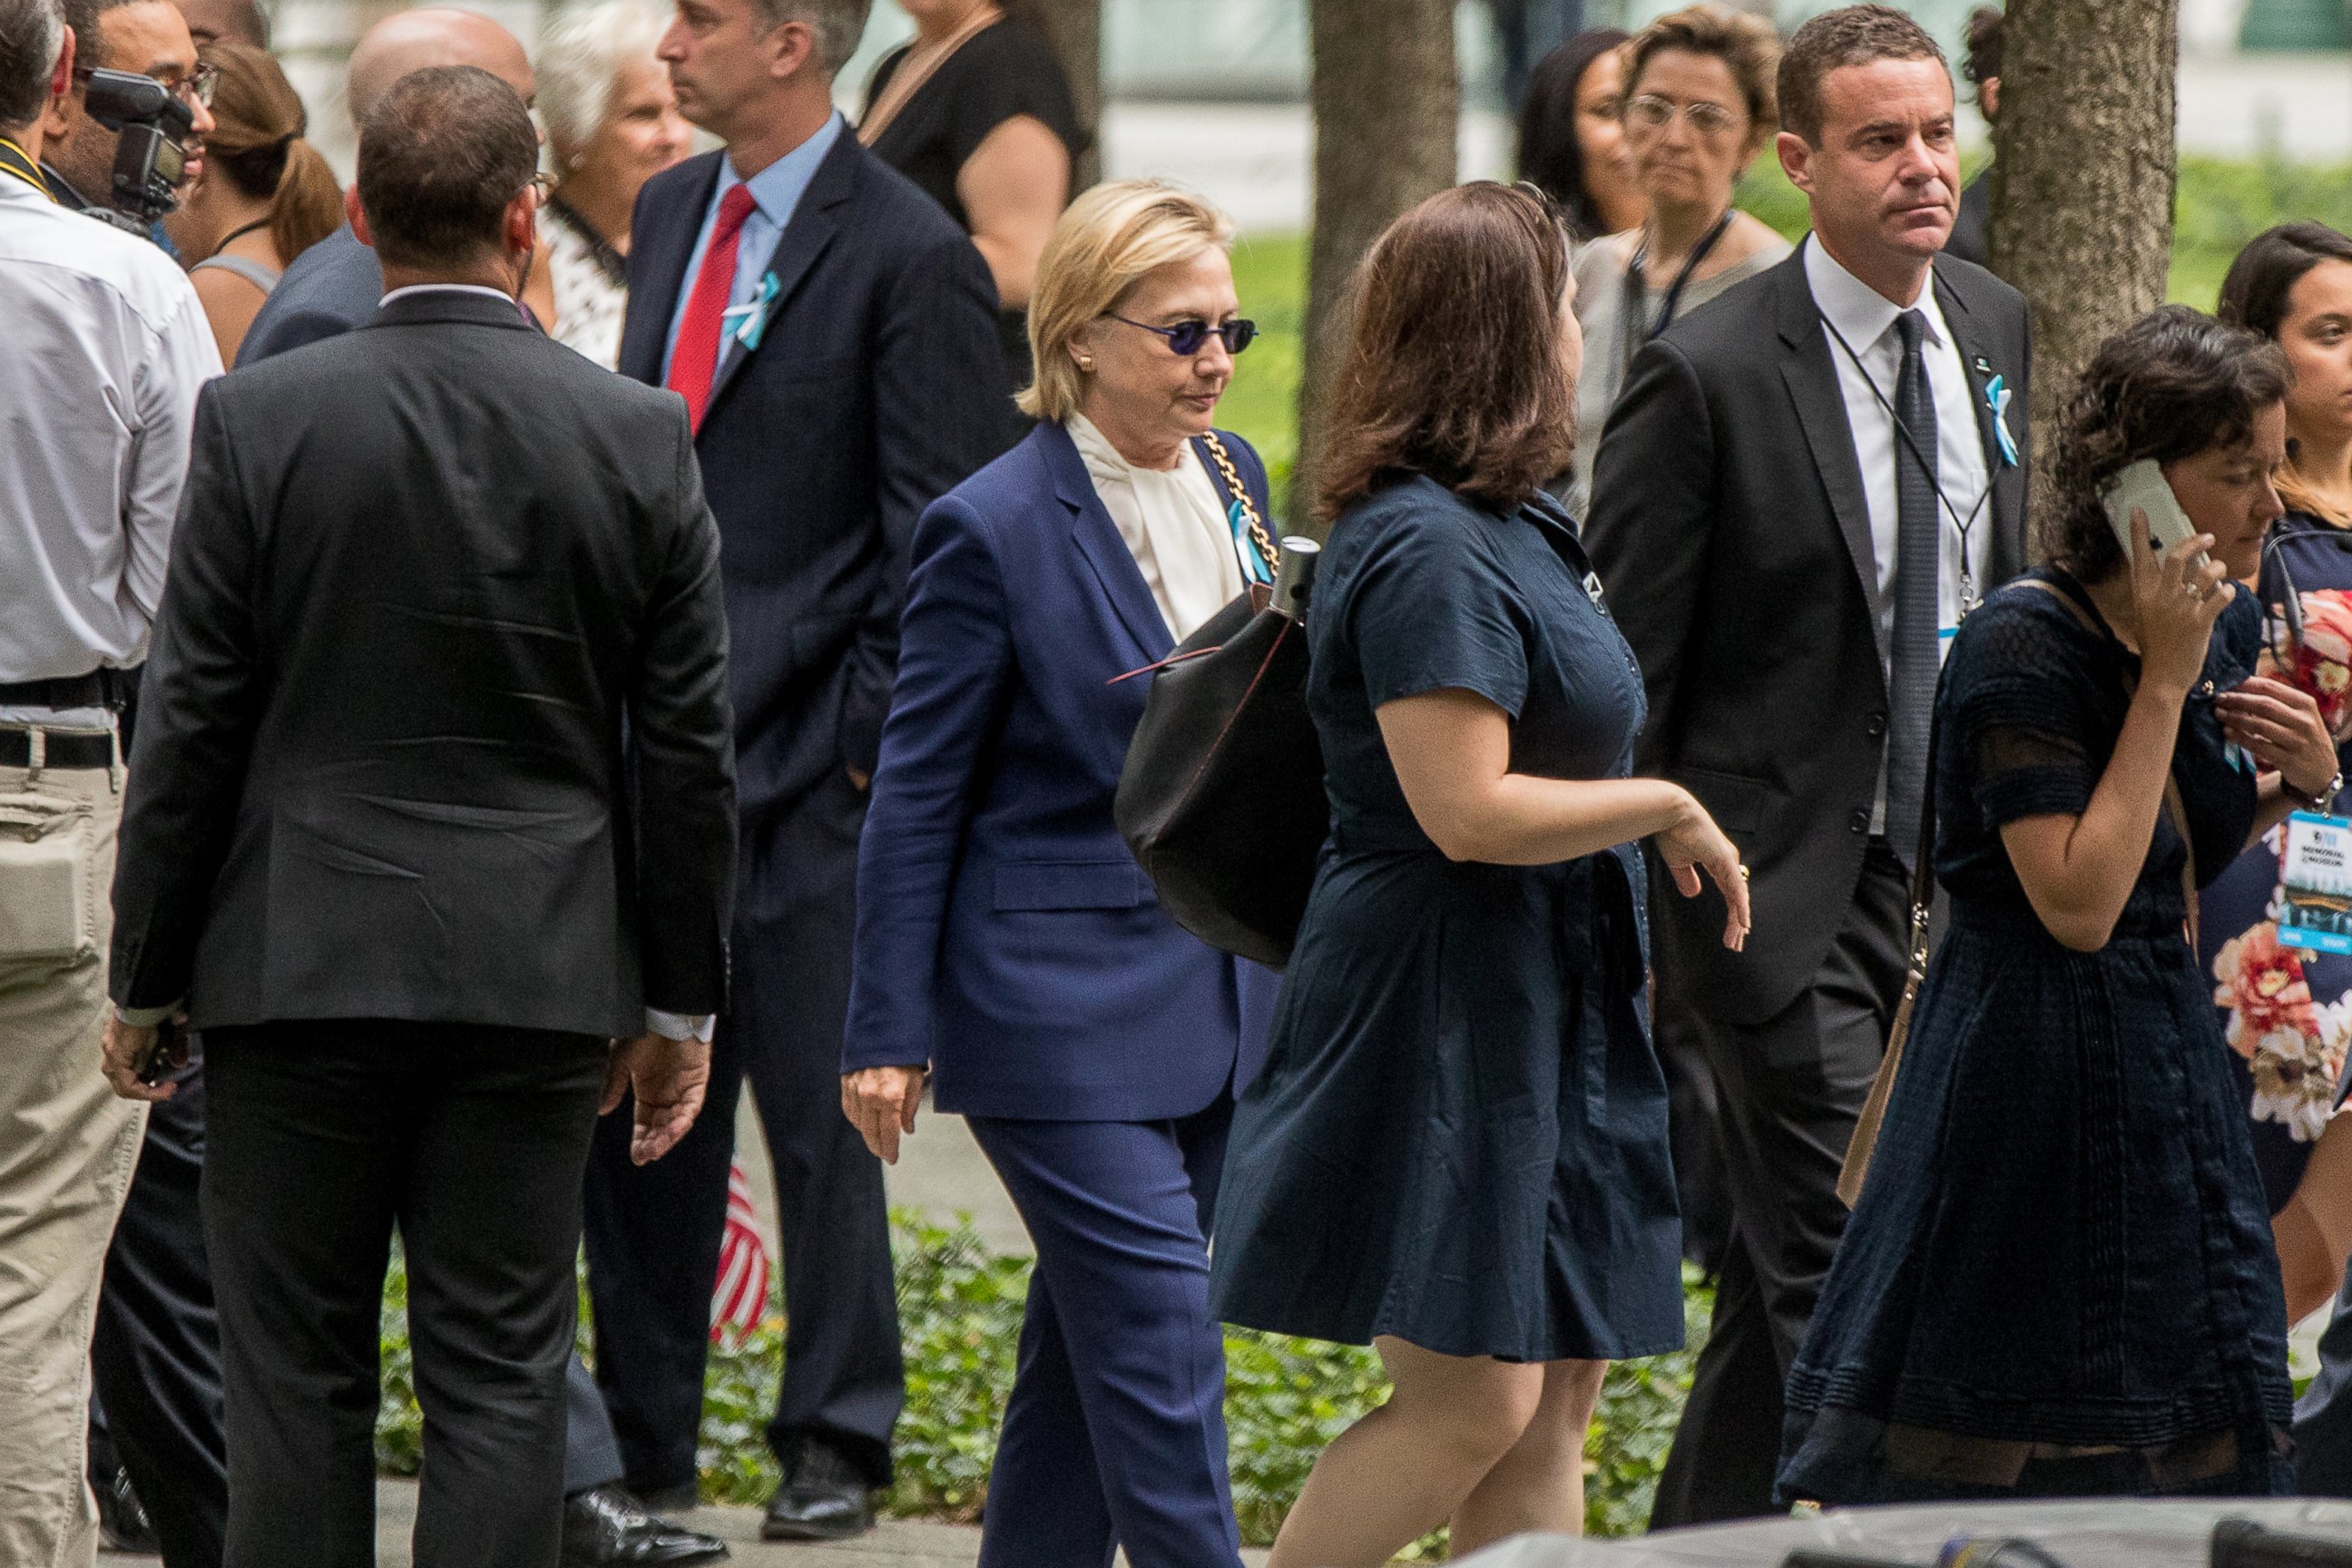 PHOTO: Democratic presidential candidate Hillary Clinton arrives to attend a ceremony at the National September 11 Memorial, in New York, Sunday, Sept. 11, 2016, on the 15th anniversary of the Sept. 11 attacks.